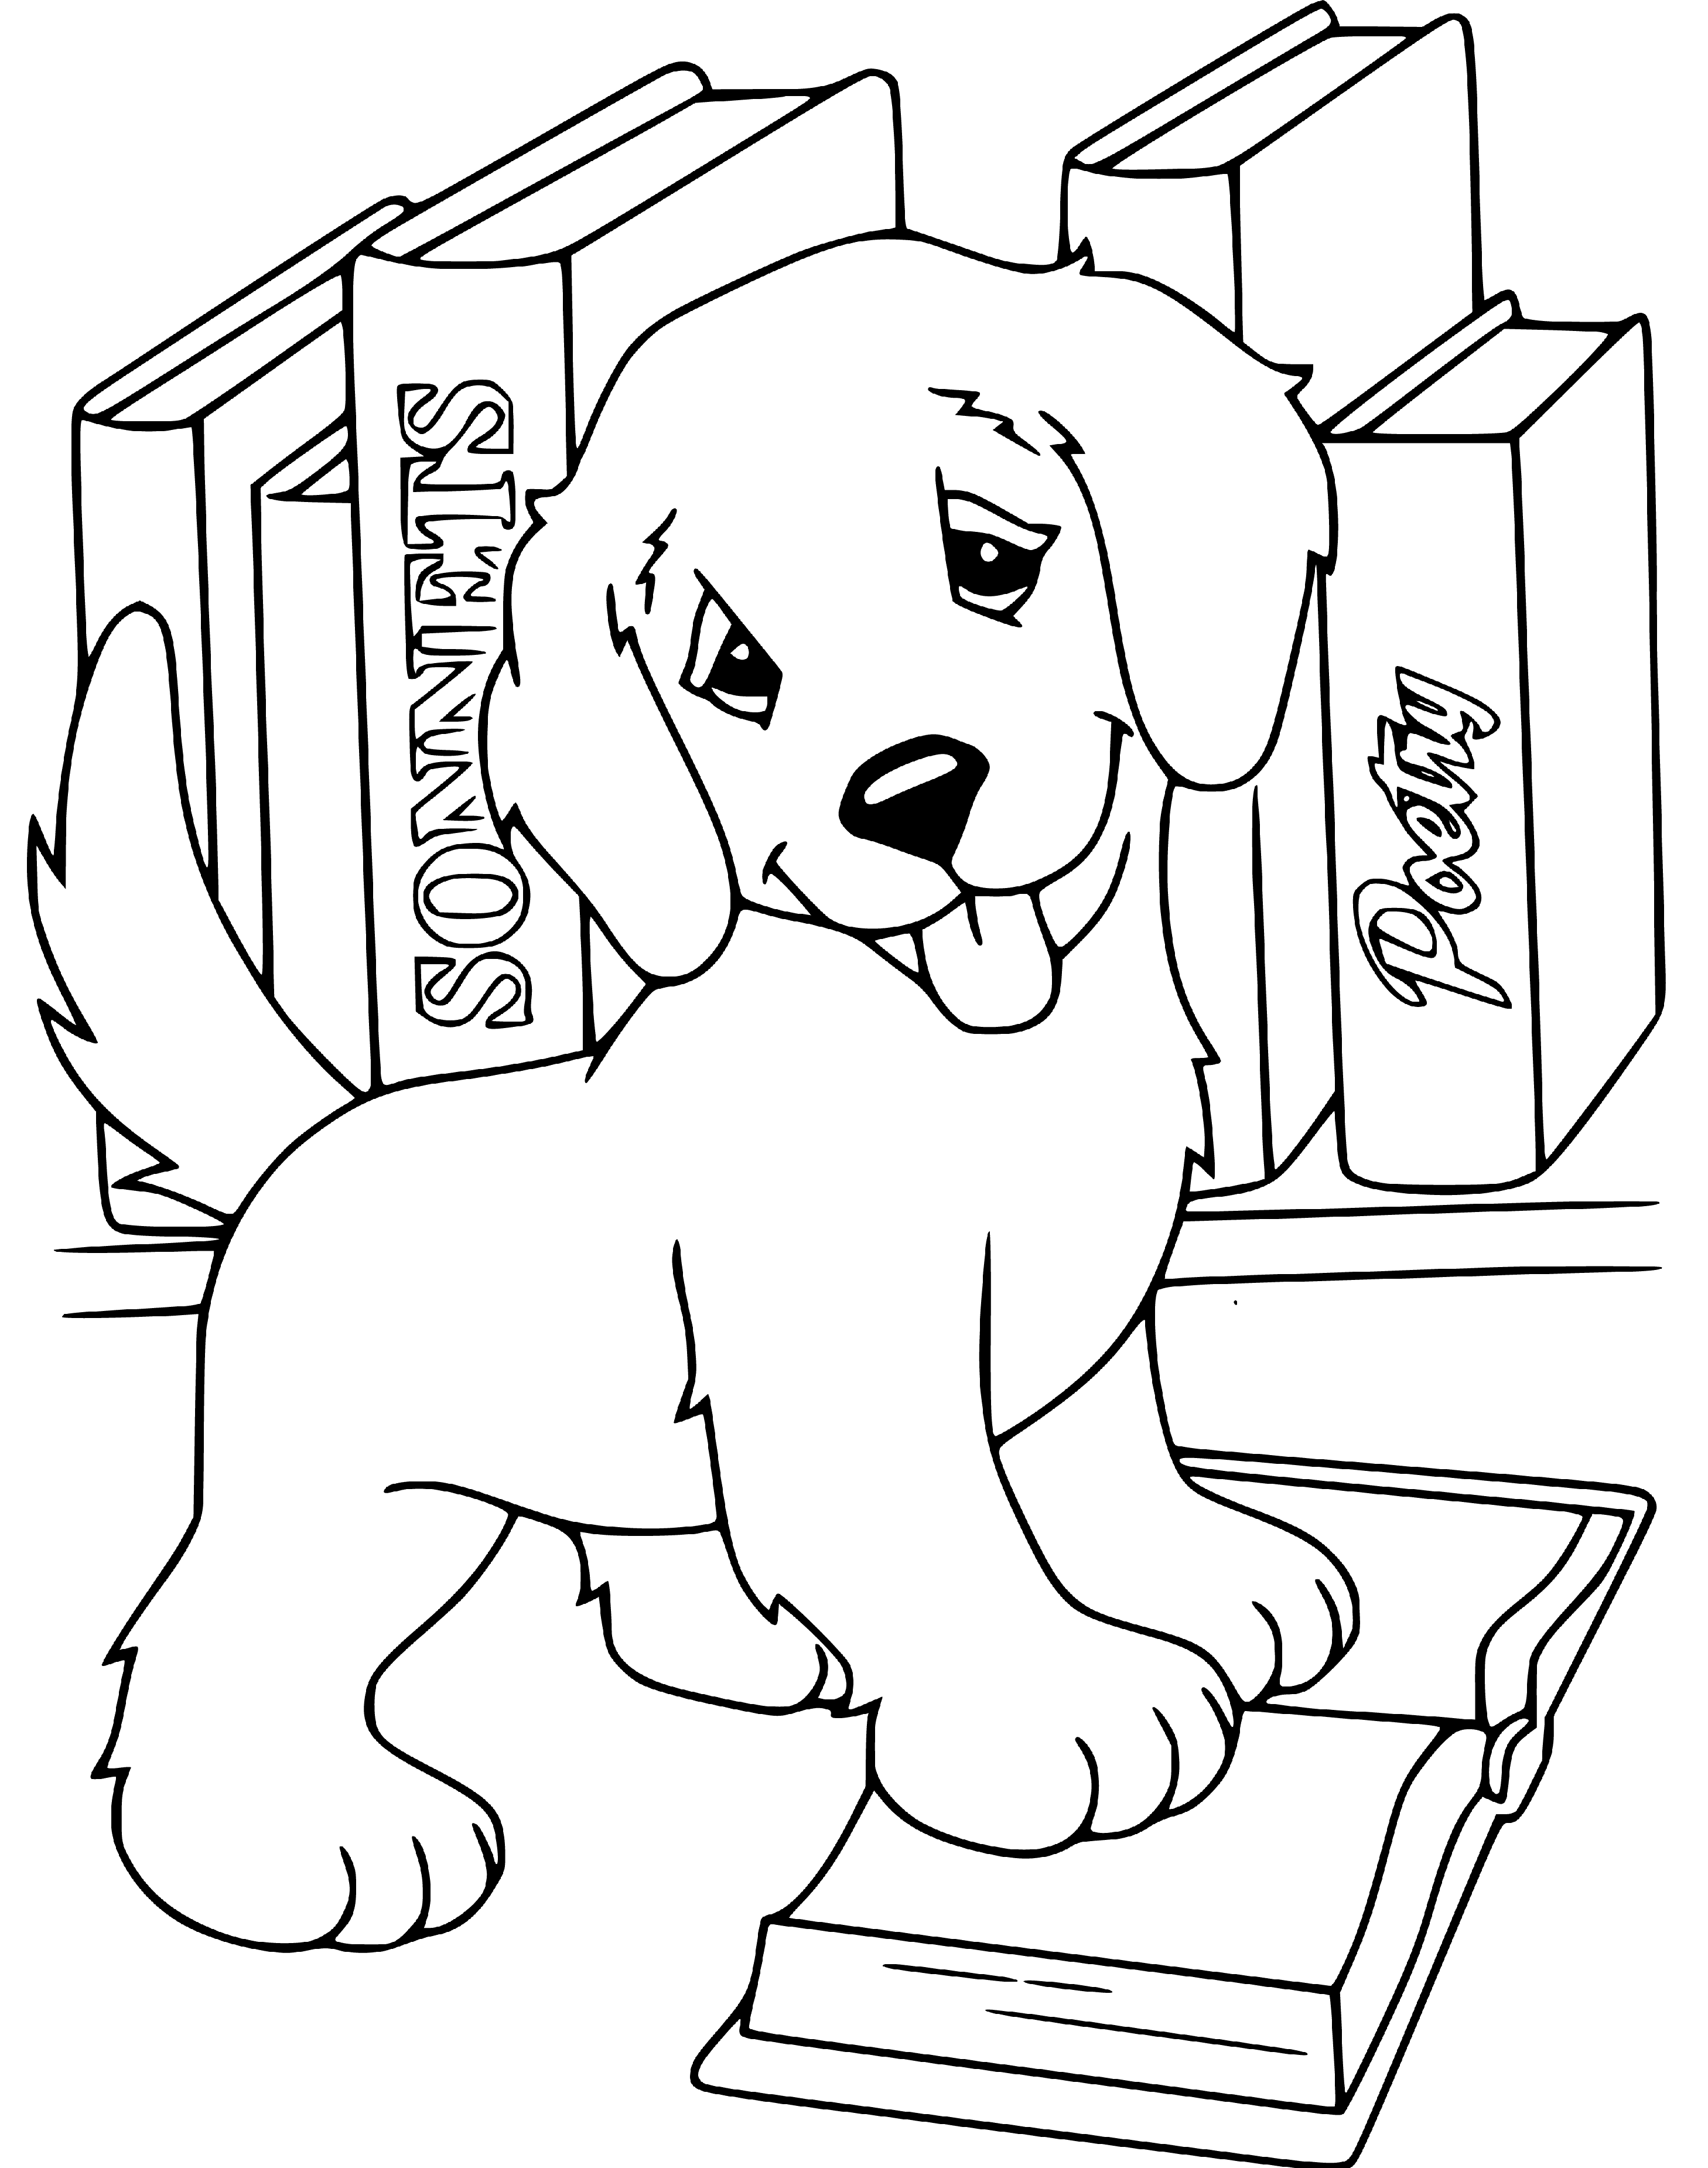 Printable Puppy with Books Coloring Page for kids.